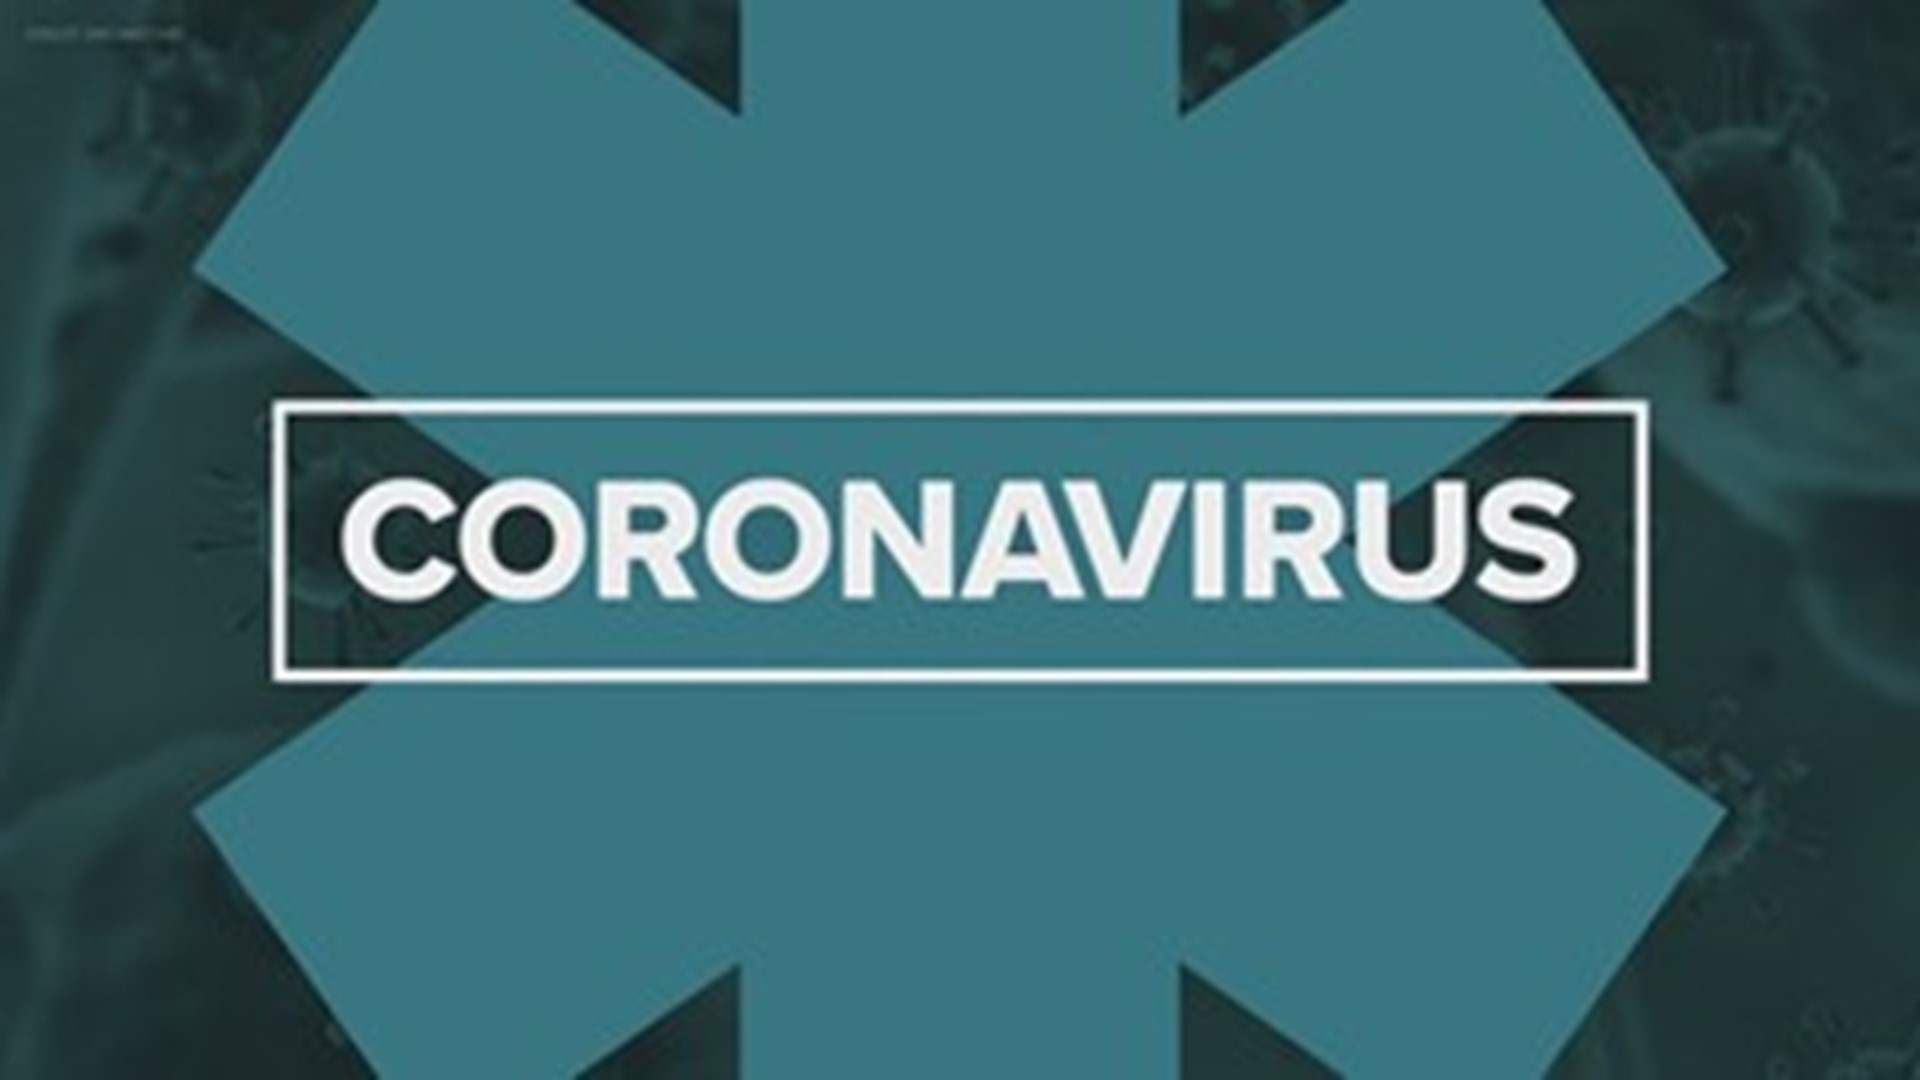 Indiana coronavirus updates: Pfizer says vaccine could be ready next month, Indiana numbers, IPS returns to remote learning Monday — 11/22/2020 11 p.m. update